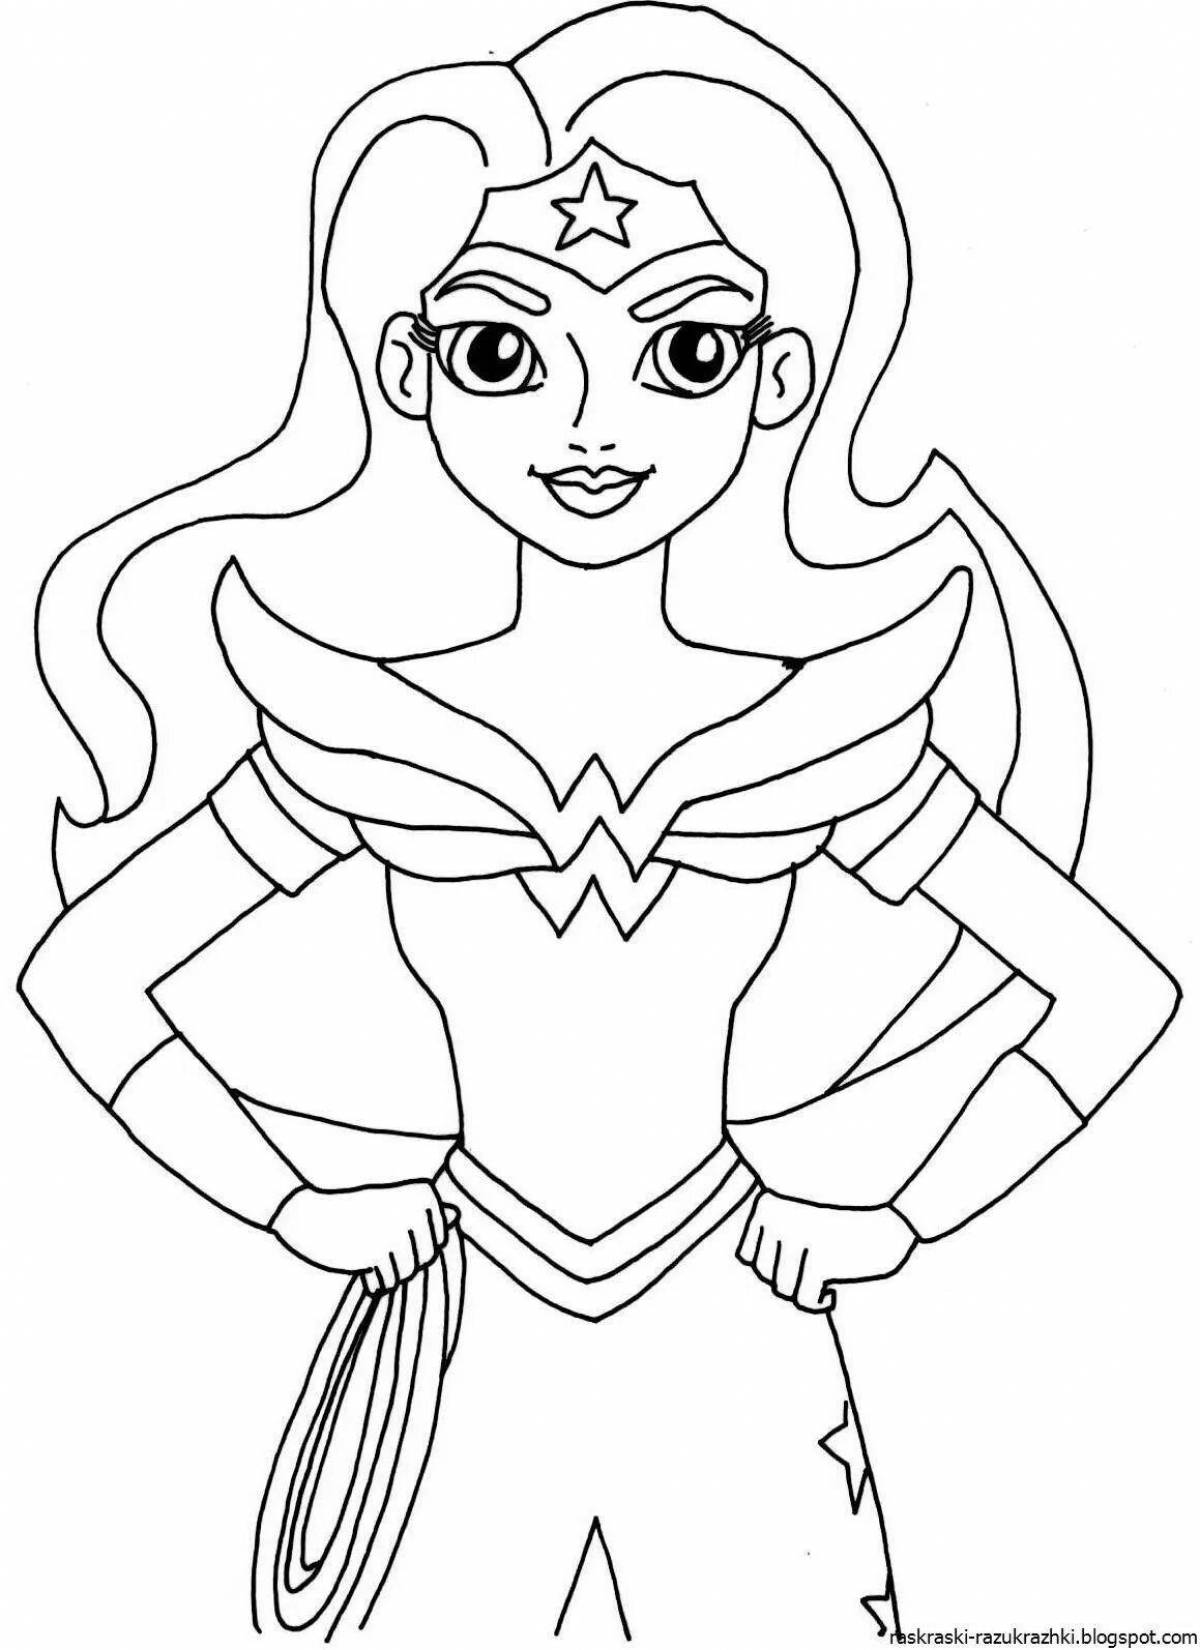 Majestic superwoman coloring page